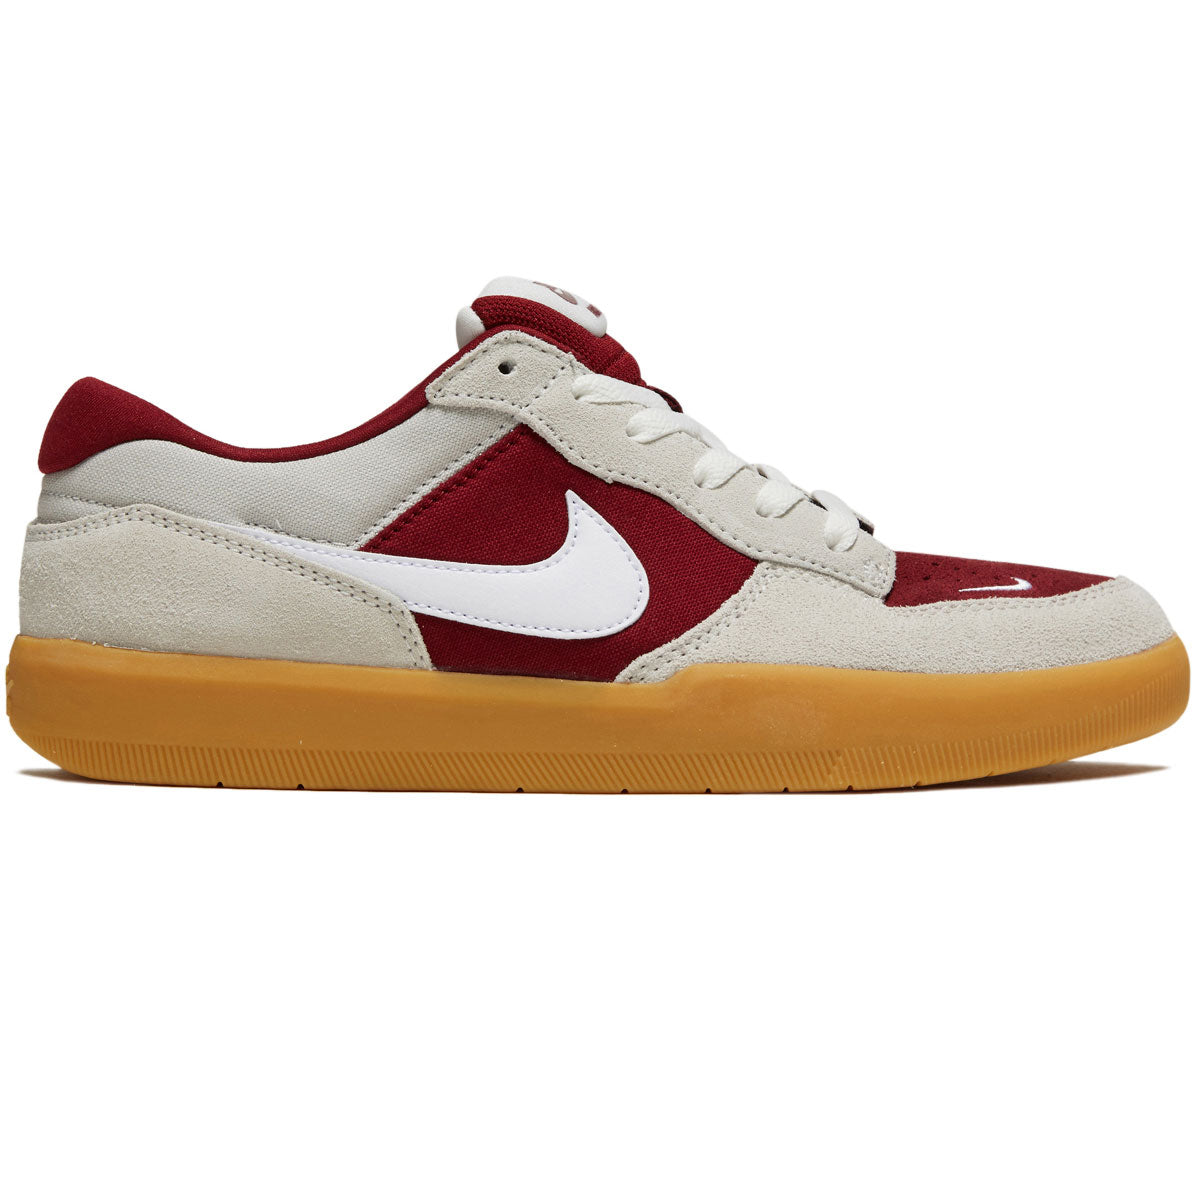 Nike SB Force 58 Shoes - Team Red/White/Summit White image 1